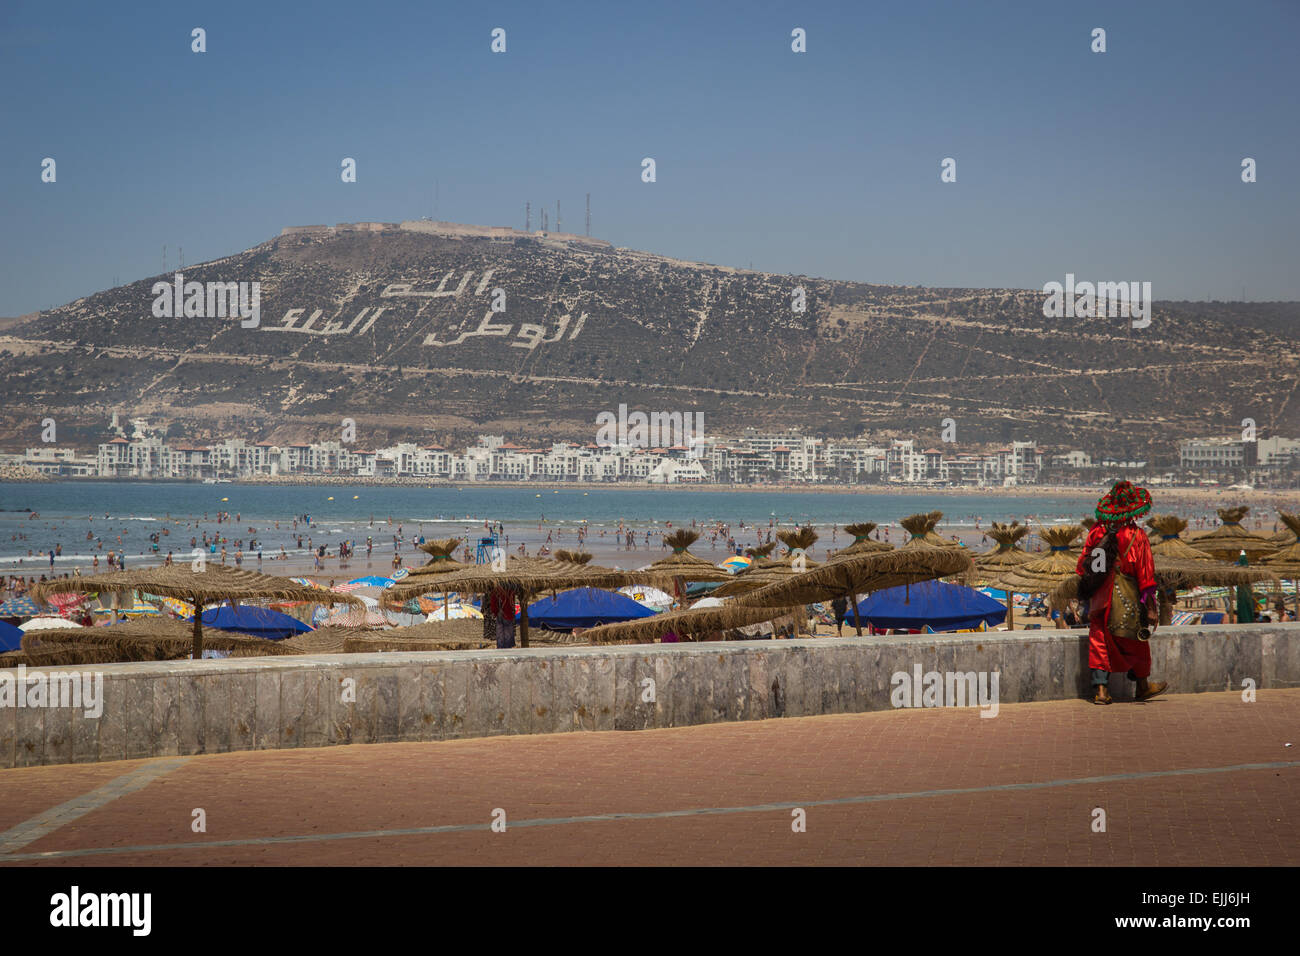 Waterboy on the seafront of Agadir. Stock Photo